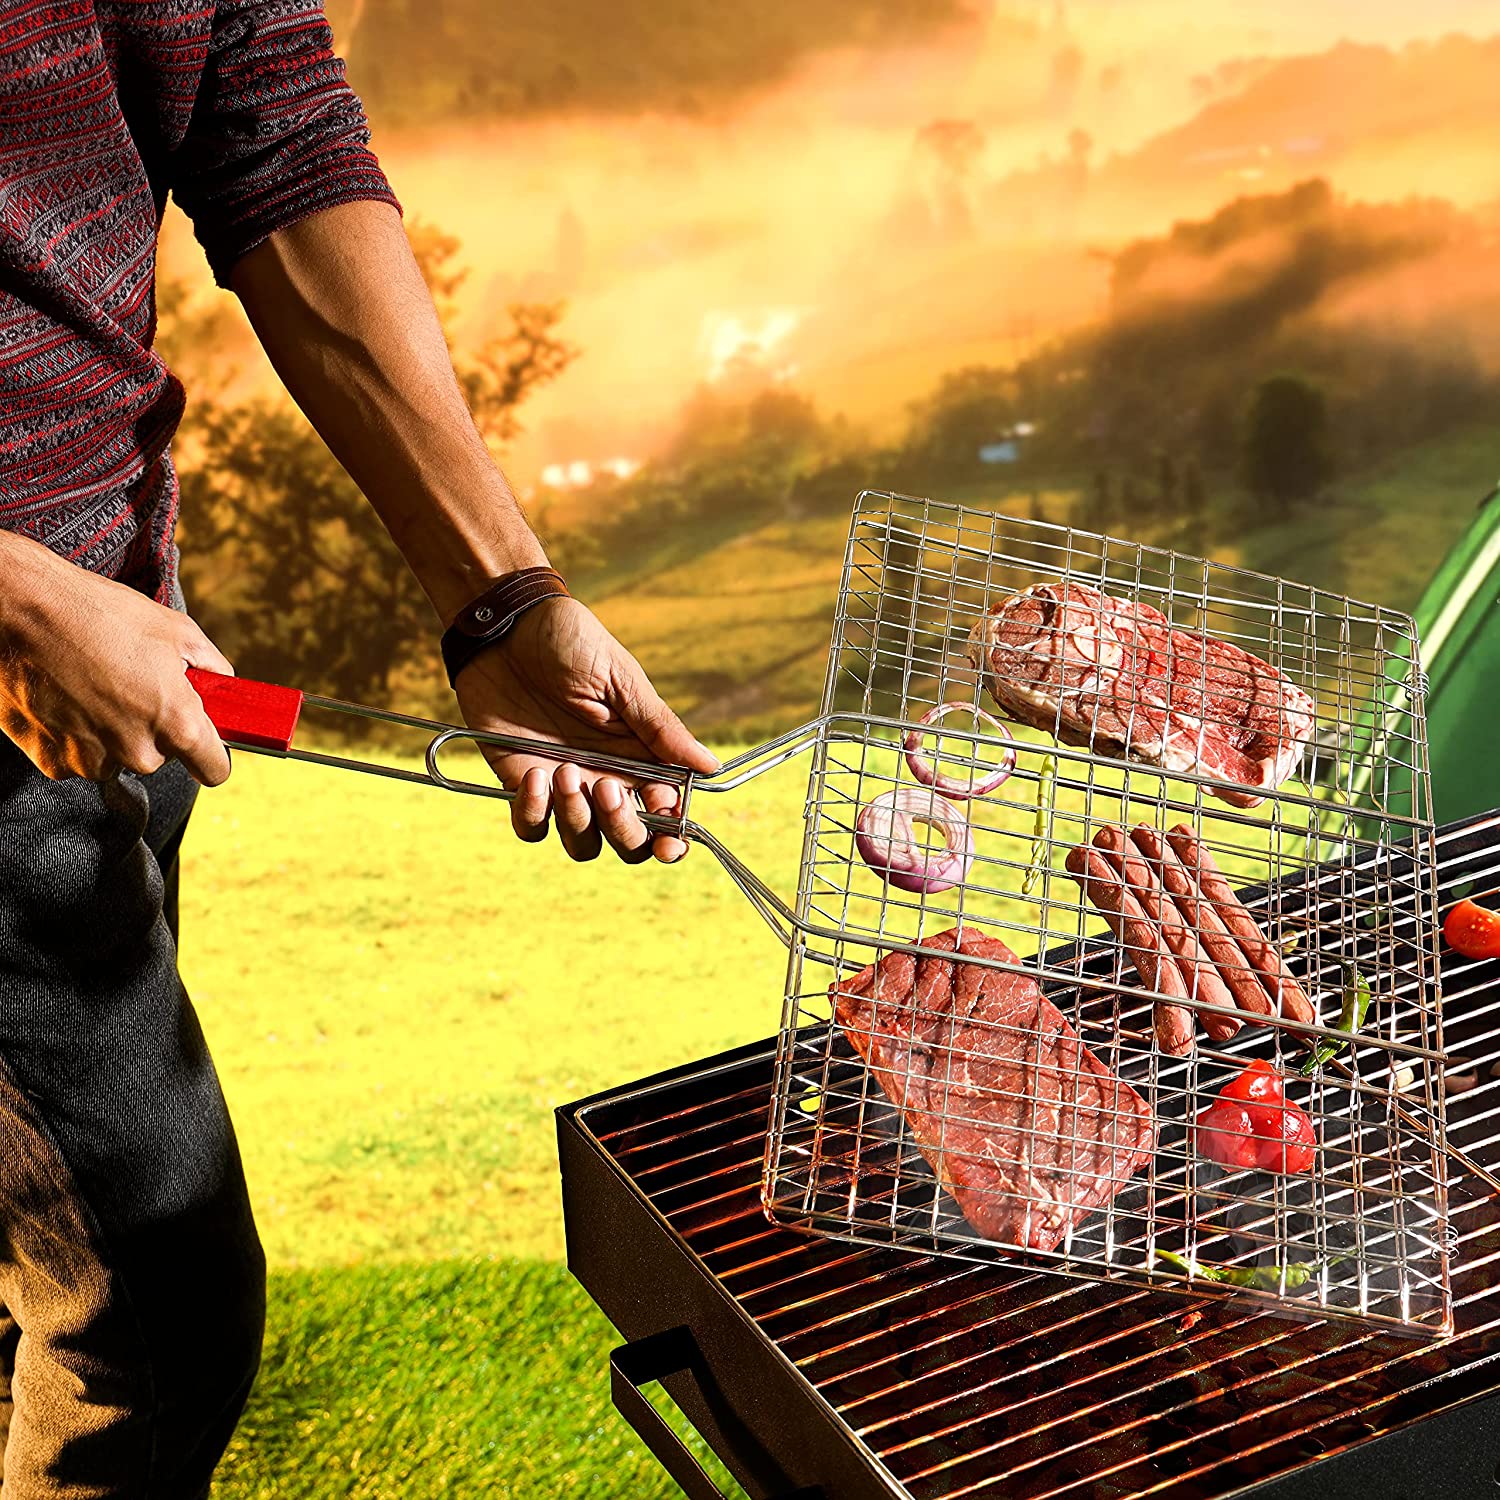 Barbecue Grill 30x40x58CM, Folding Portable BBQ Grill, DC2197 - Basket for Fish Vegetables Shrimp with Removable Handle, Larger Grilling Area, Premium-Quality Material